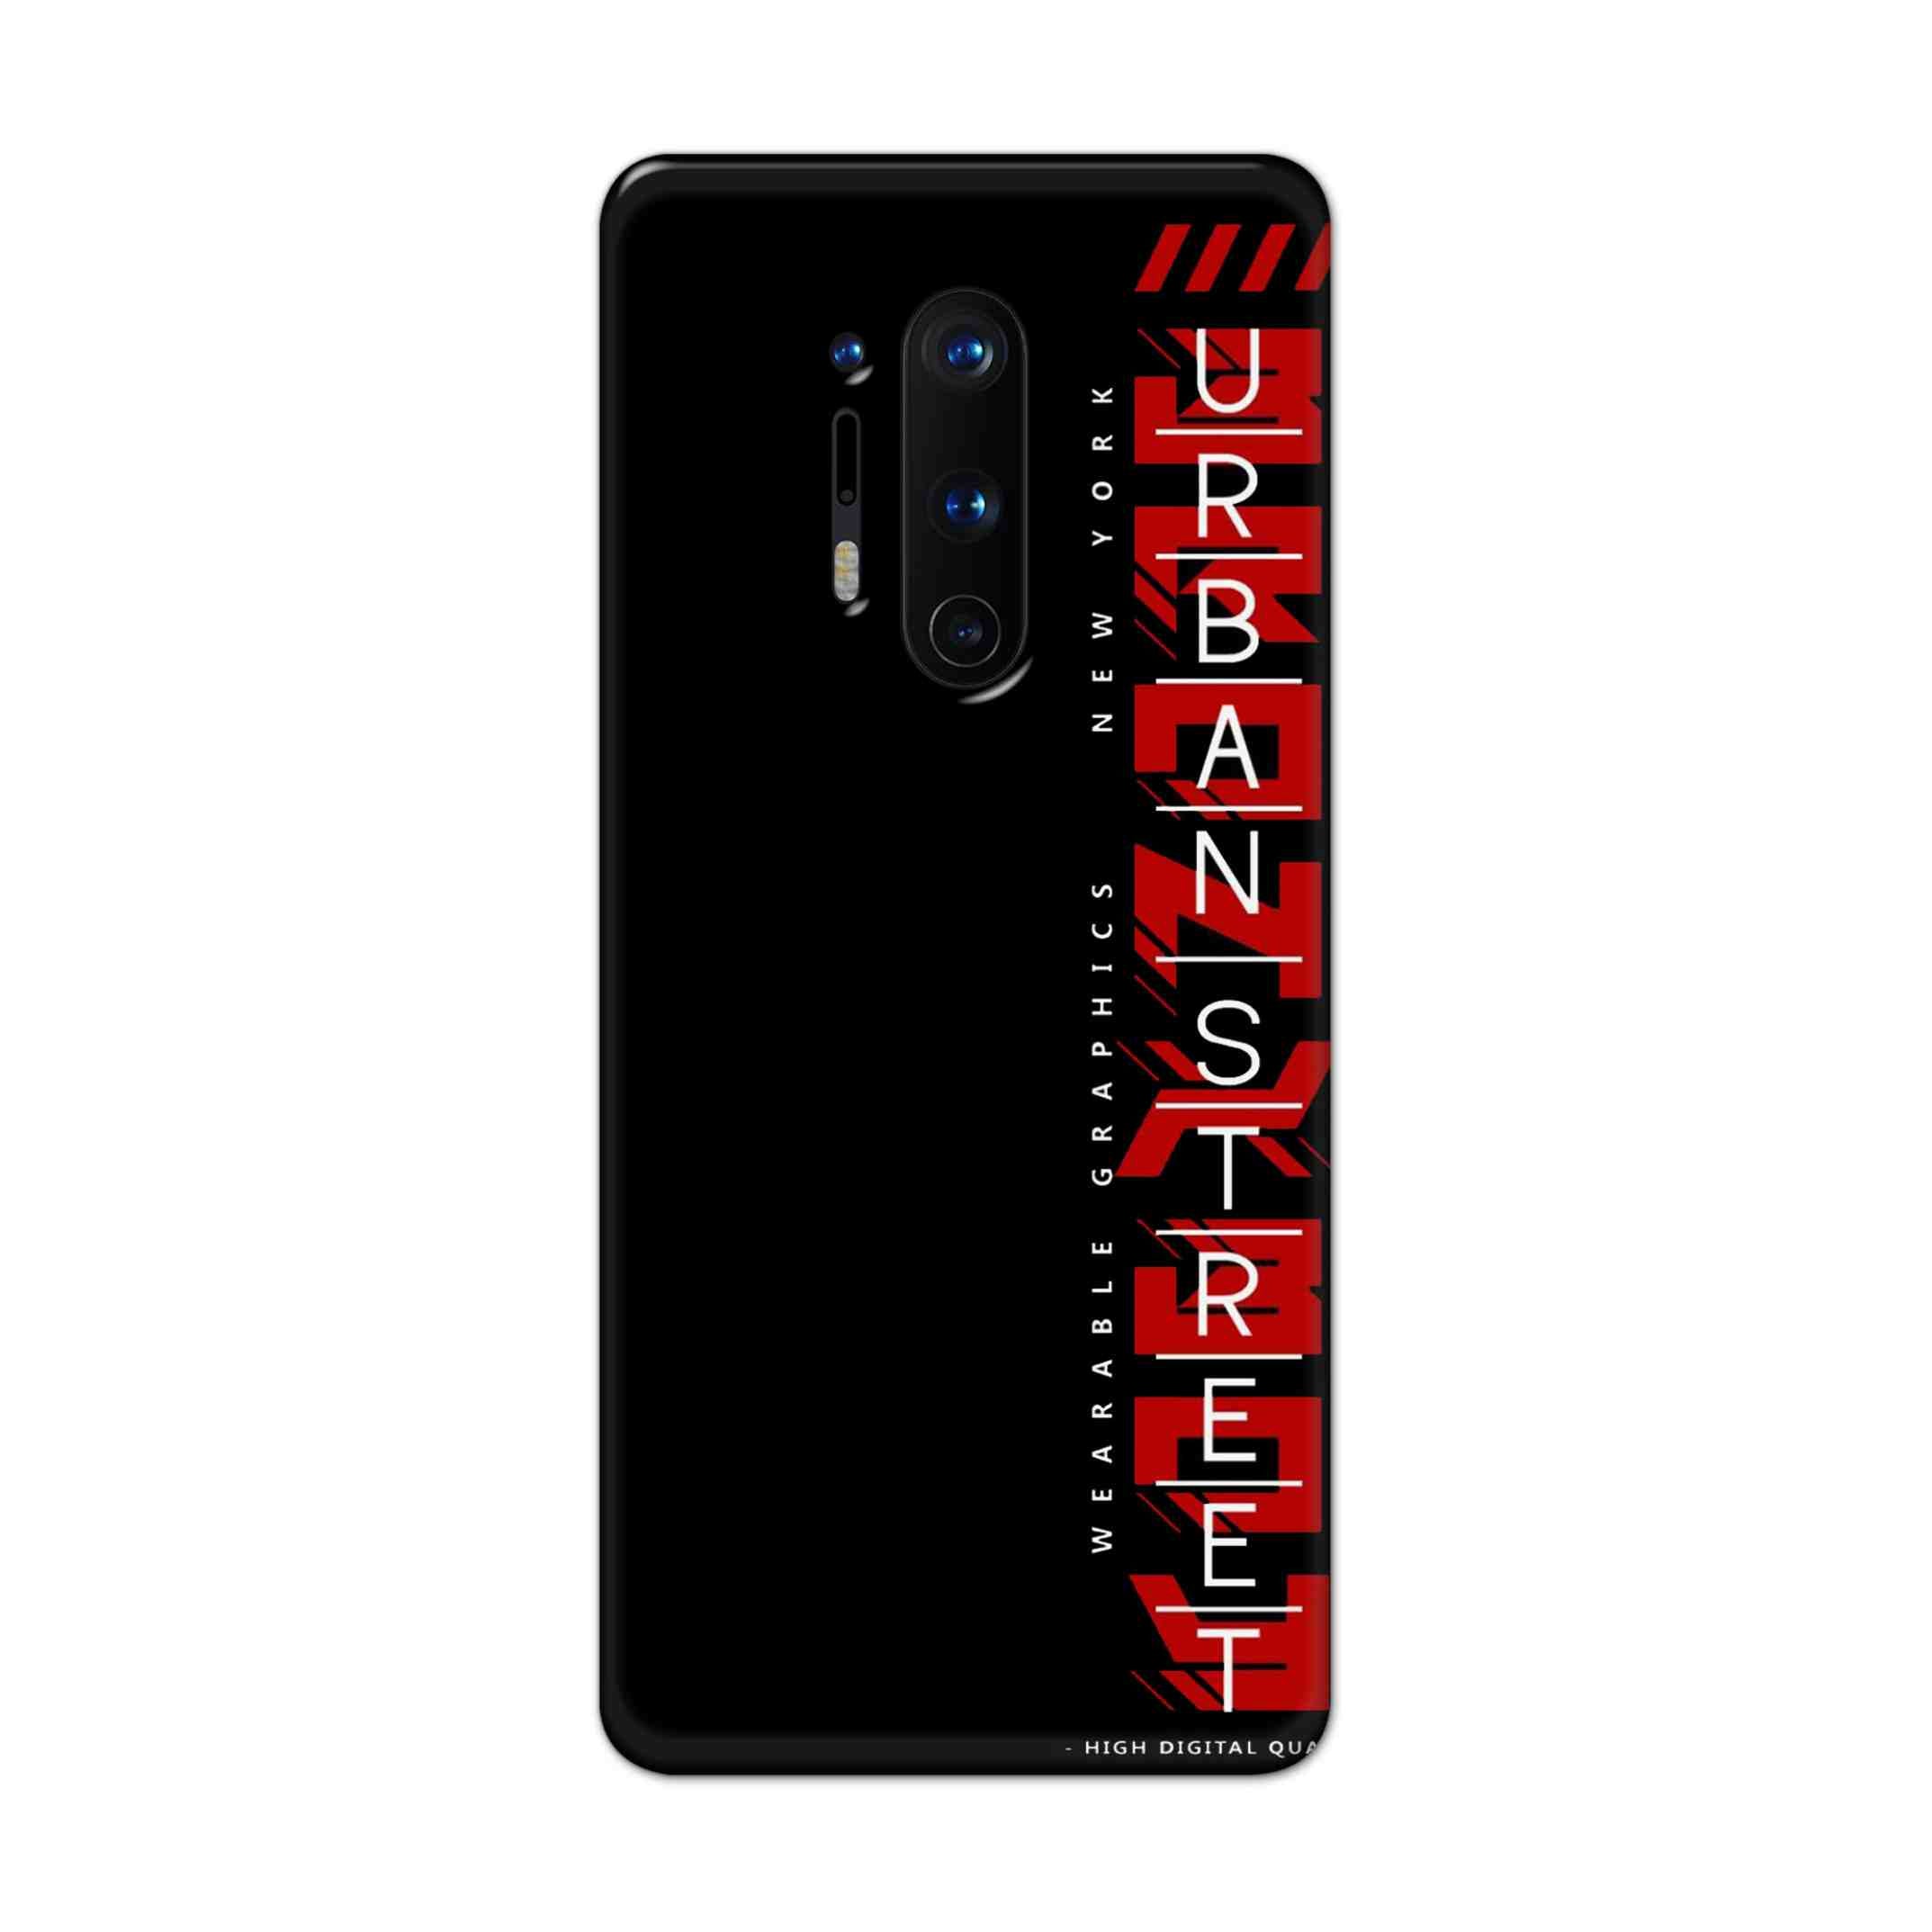 Buy Urban Street Hard Back Mobile Phone Case Cover For OnePlus 8 Pro Online